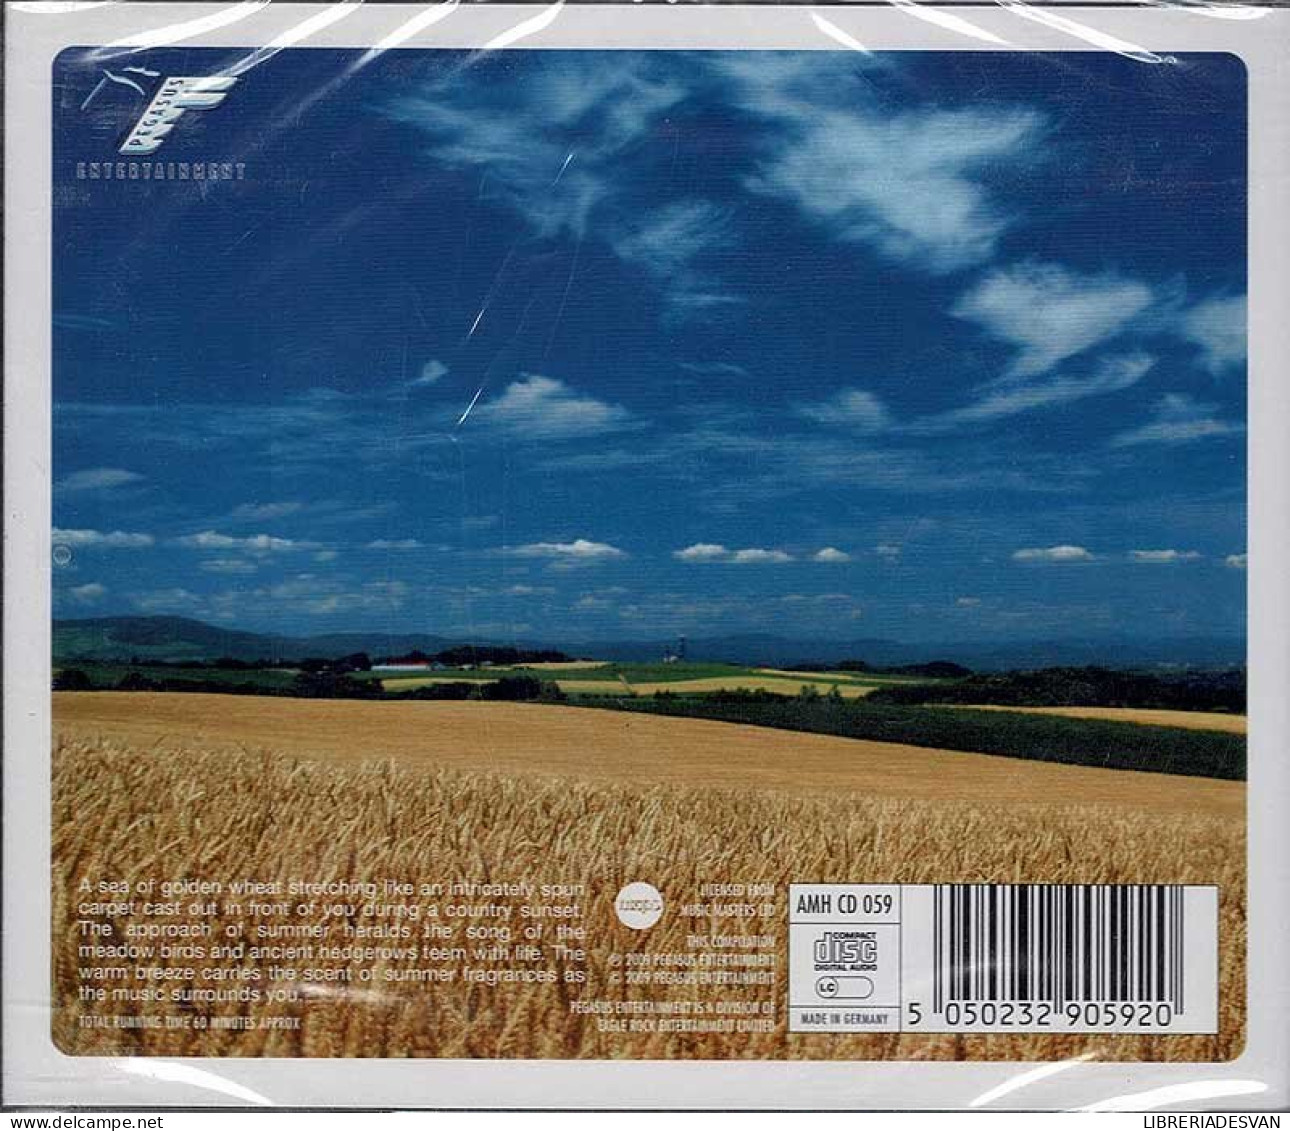 Ambient Heaven - Fields Of Gold. CD - New Age